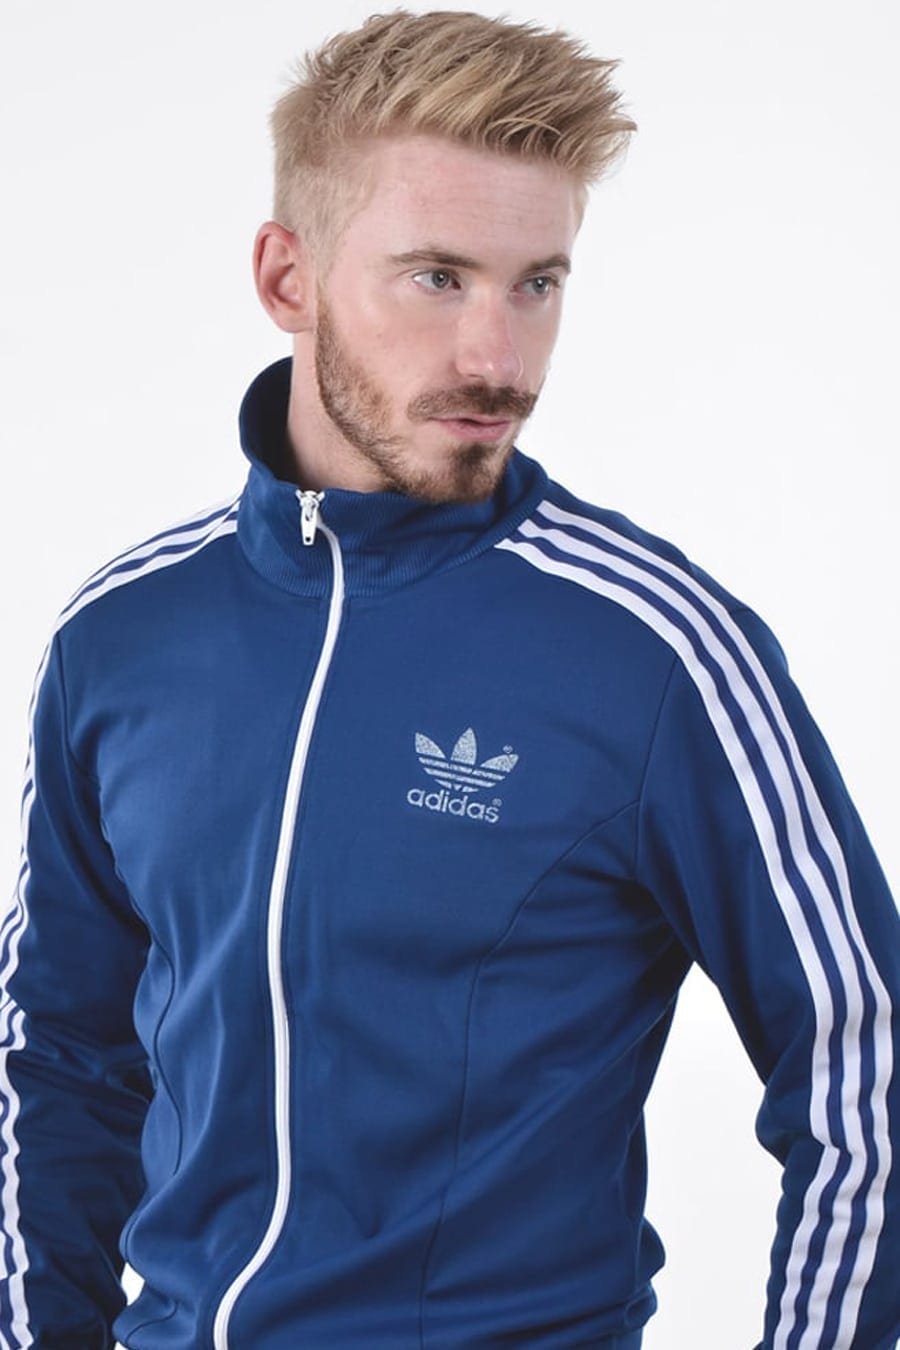 Men's Vintage Adidas Clothing - Available From Brick Vintage